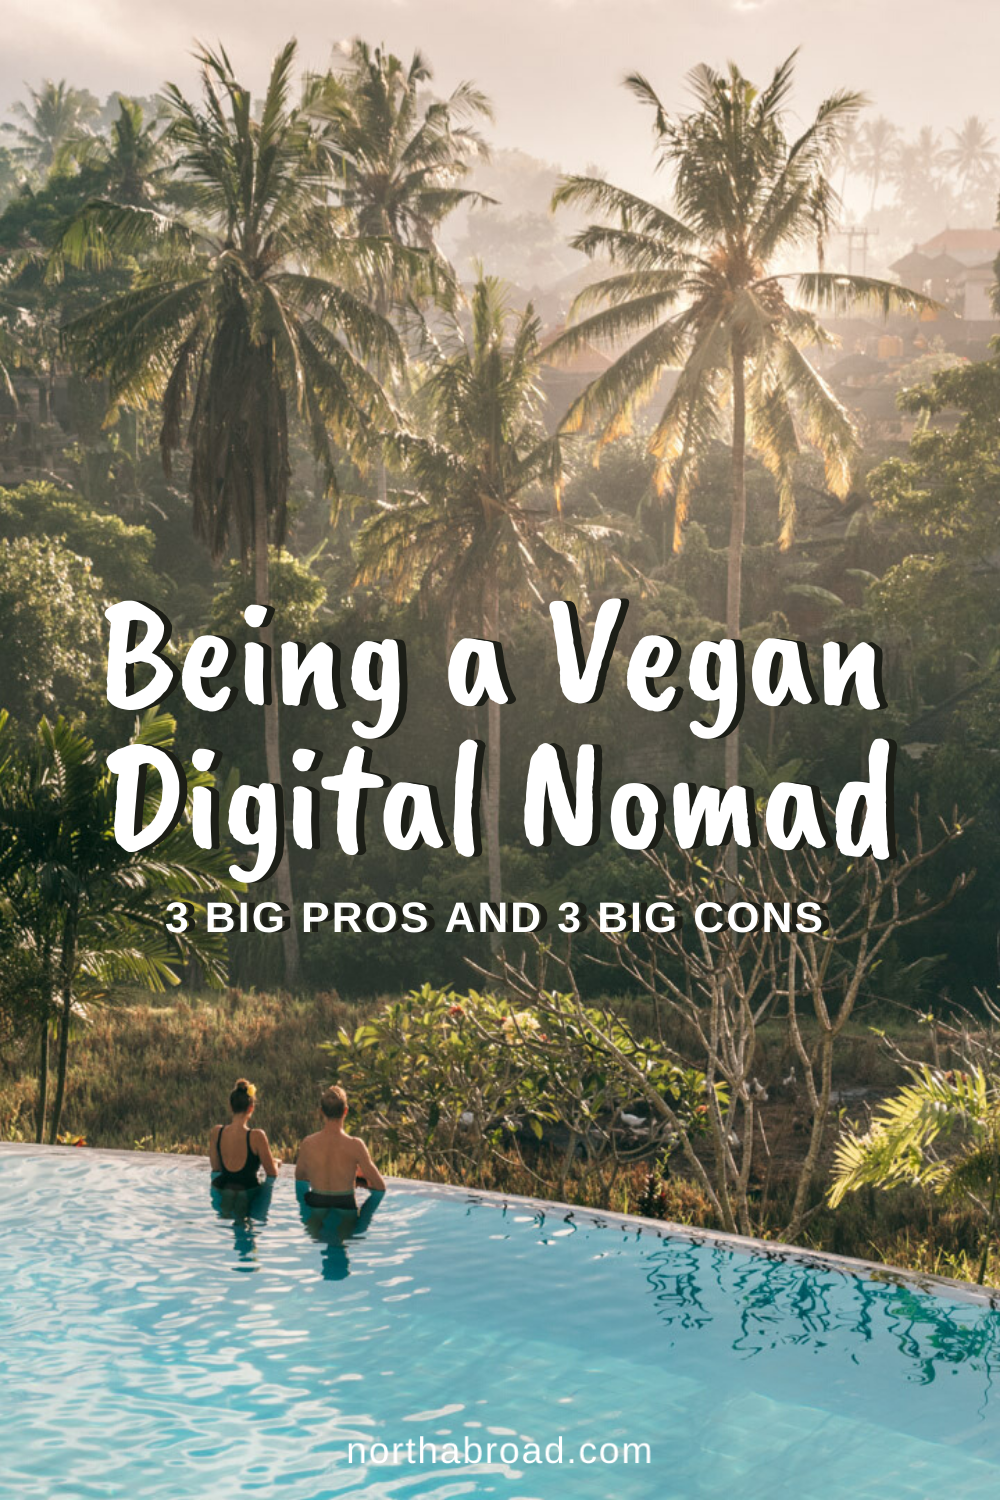 3 Big Pros (and 3 Big Cons) of Being a Vegan Digital Nomad